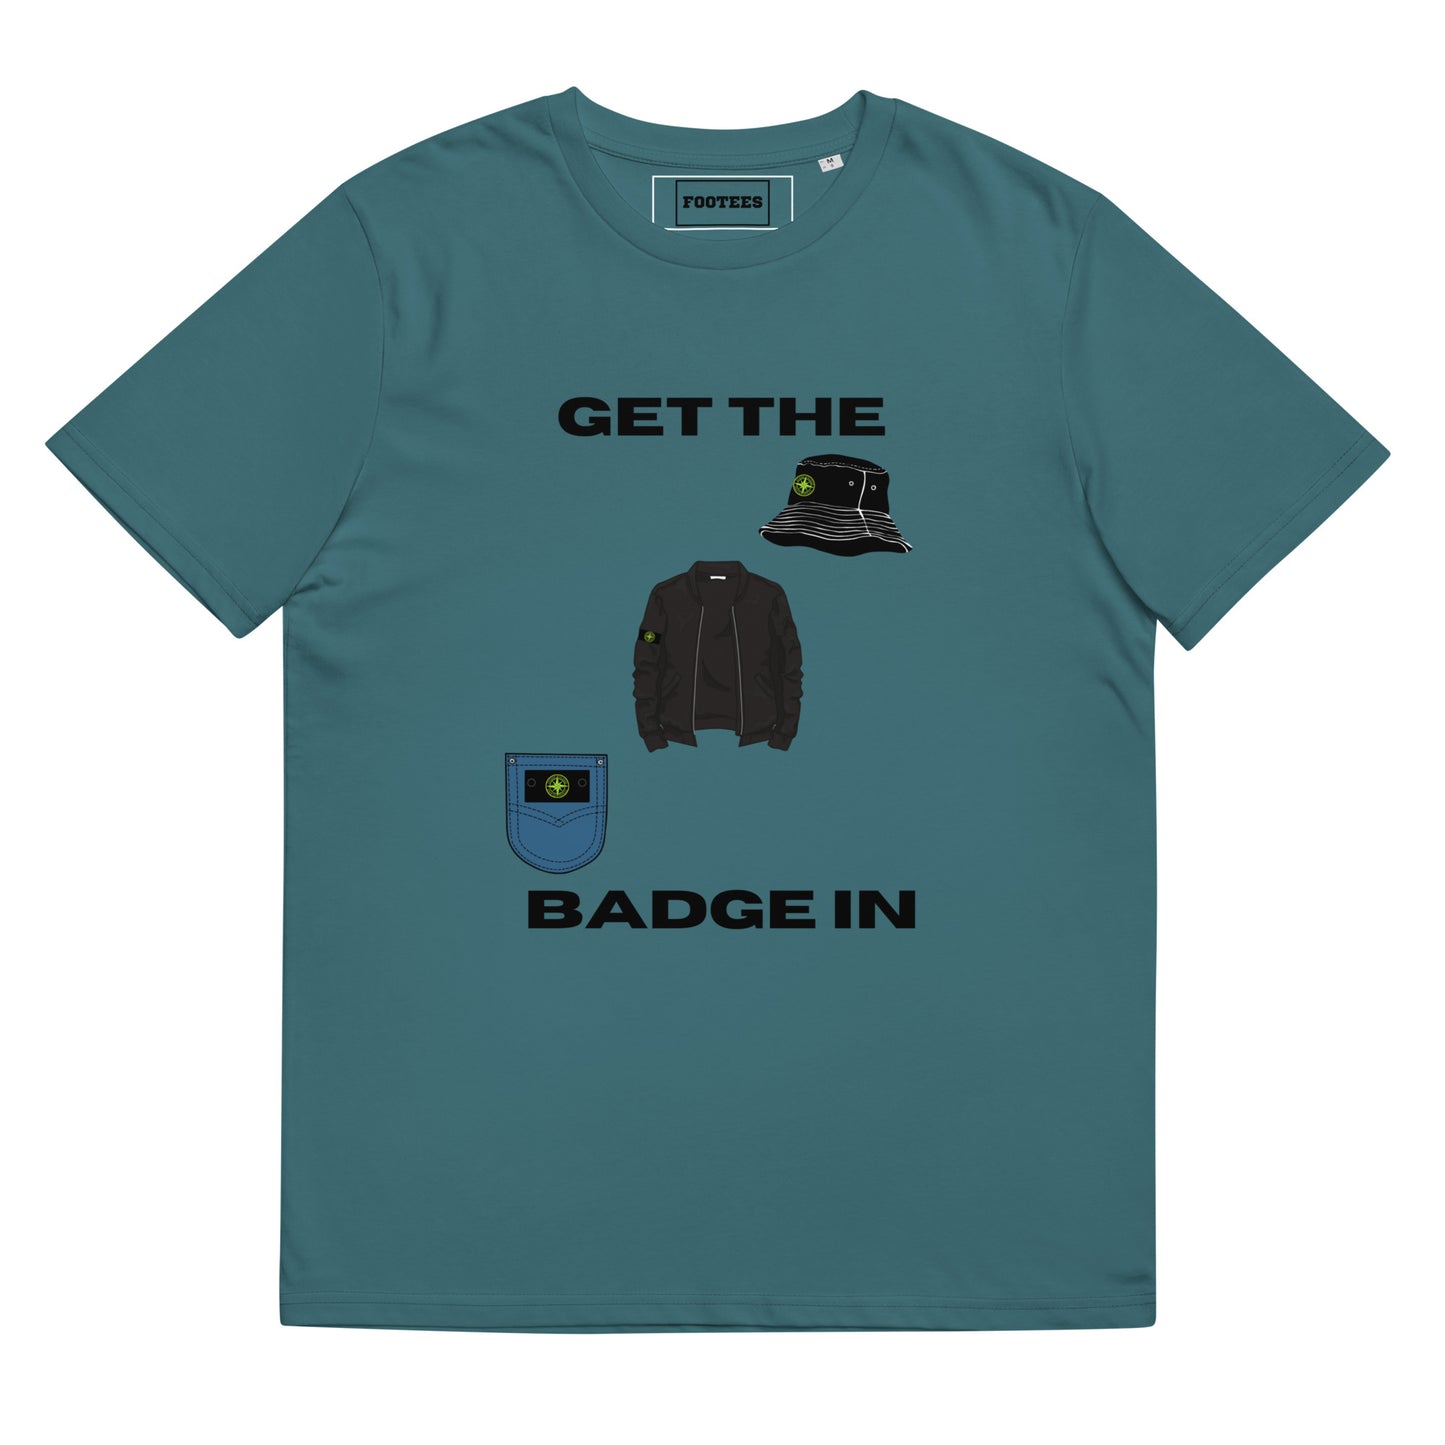 Get the badge in Tee